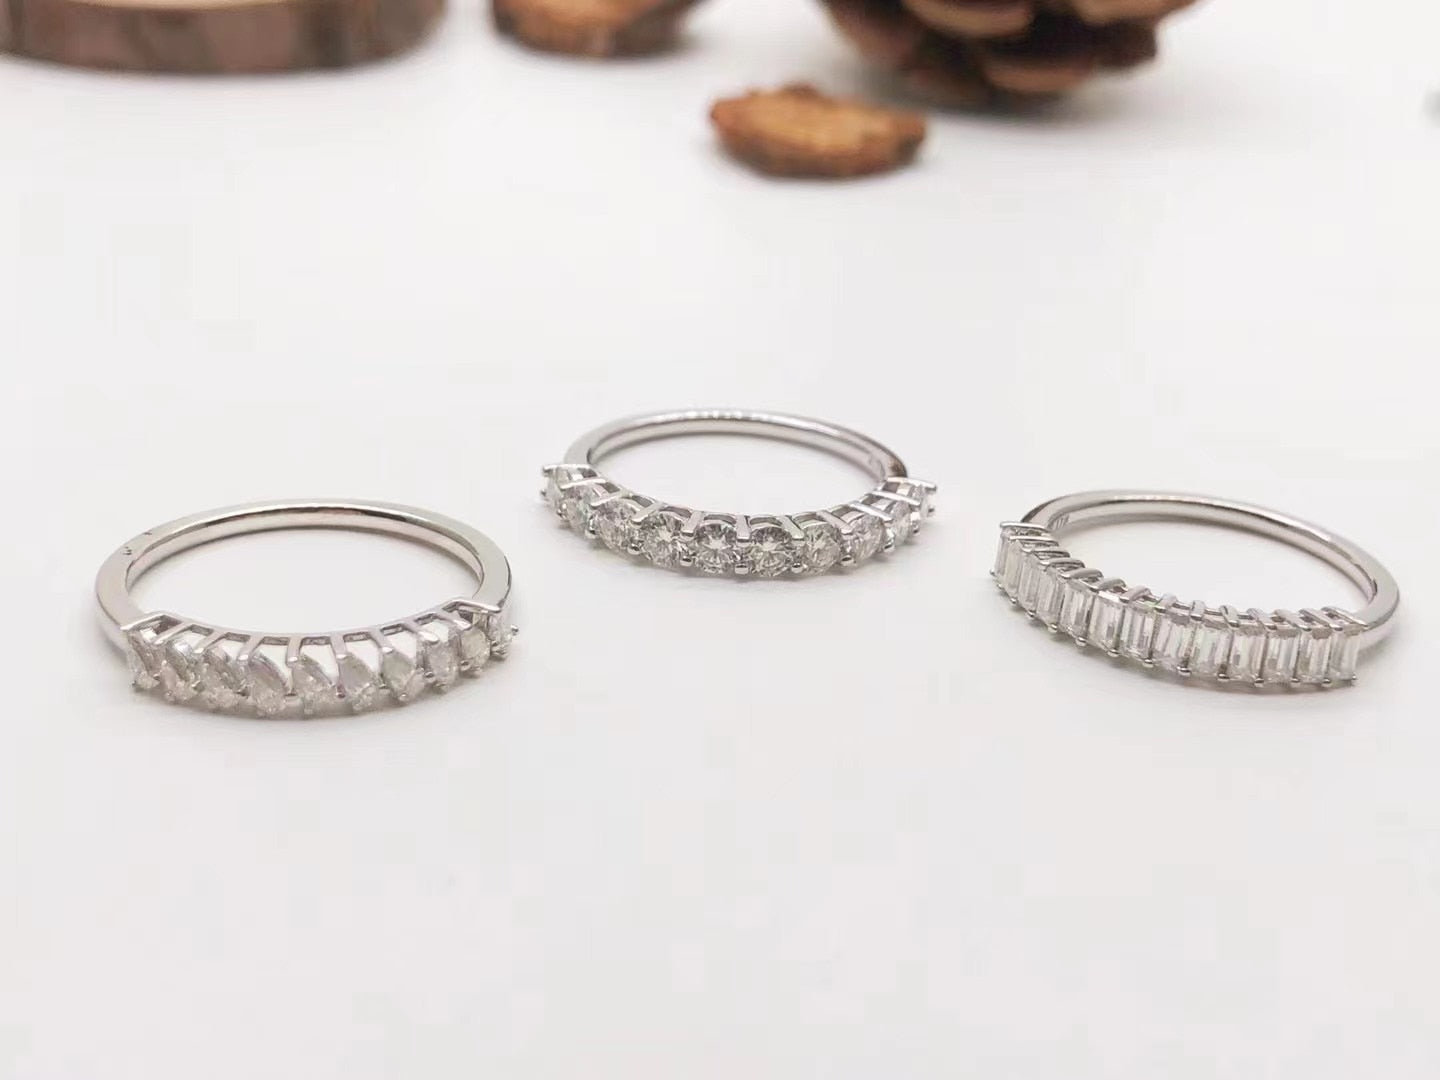 3 wedding rings with various cuts of gems in each ring.